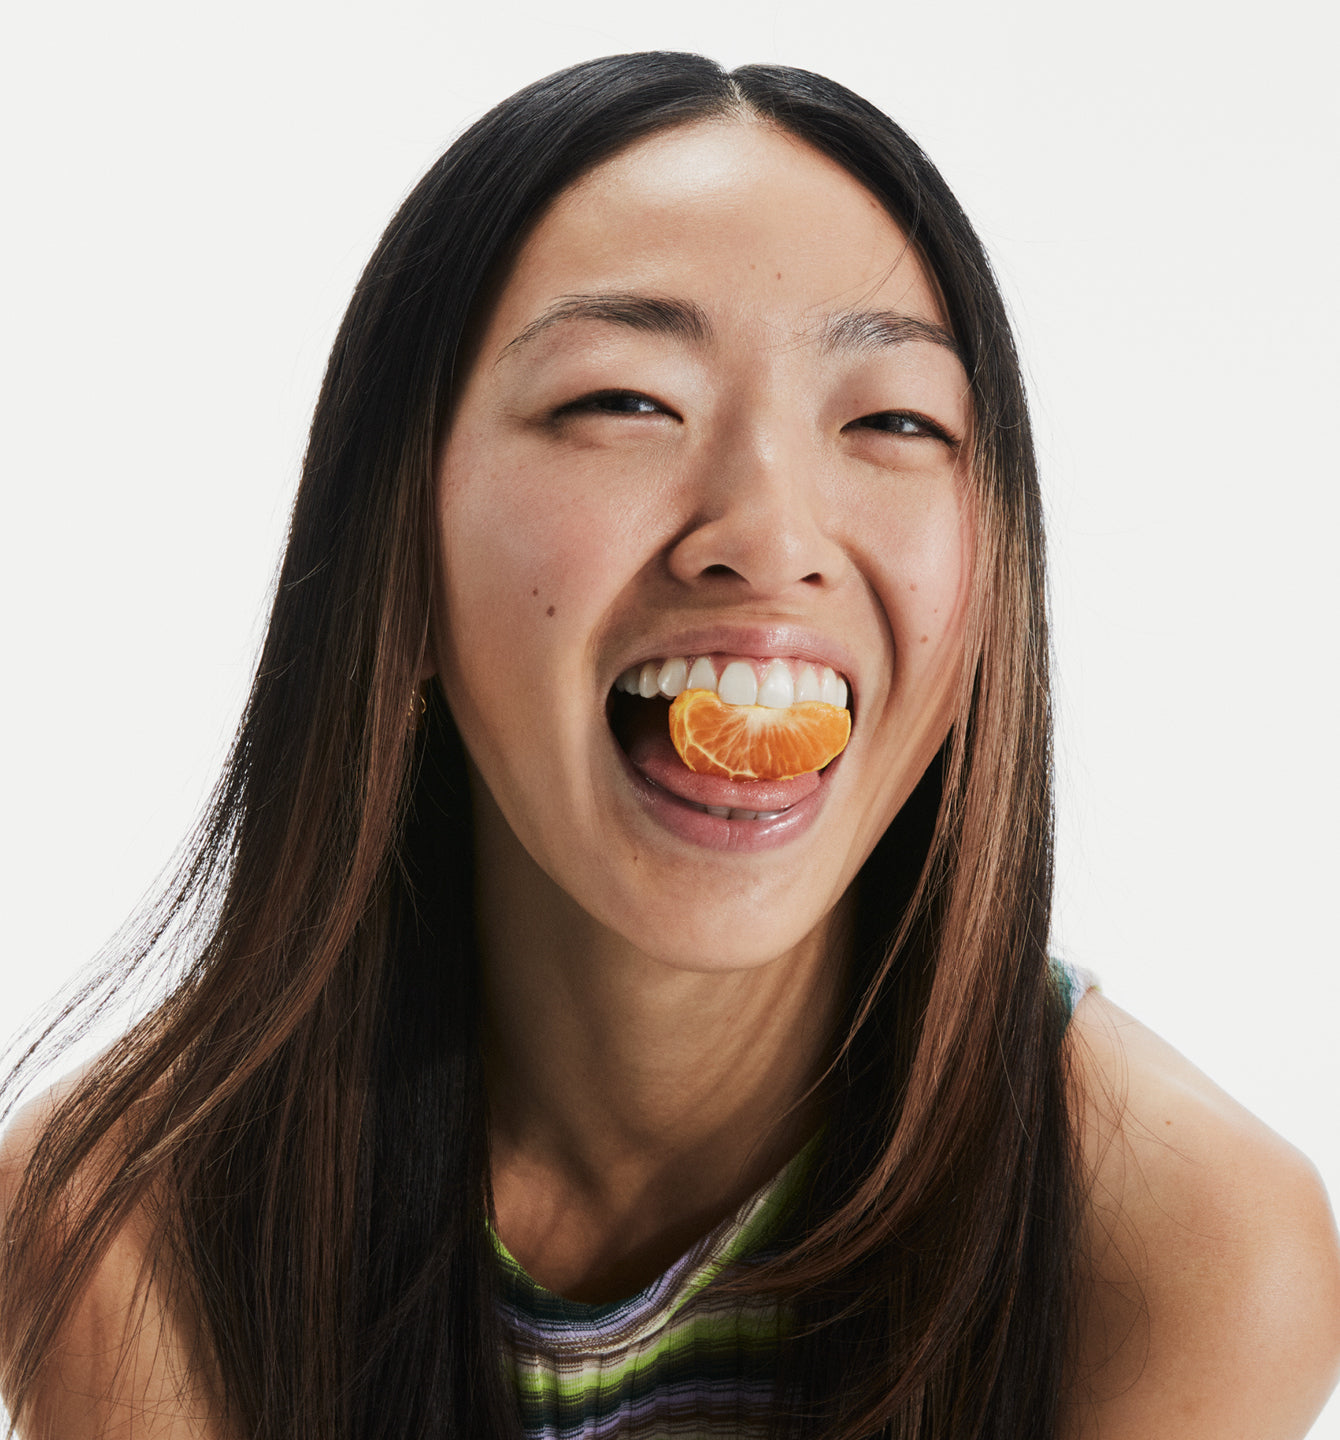 Woman with an orange segment placed in-between her teeth.